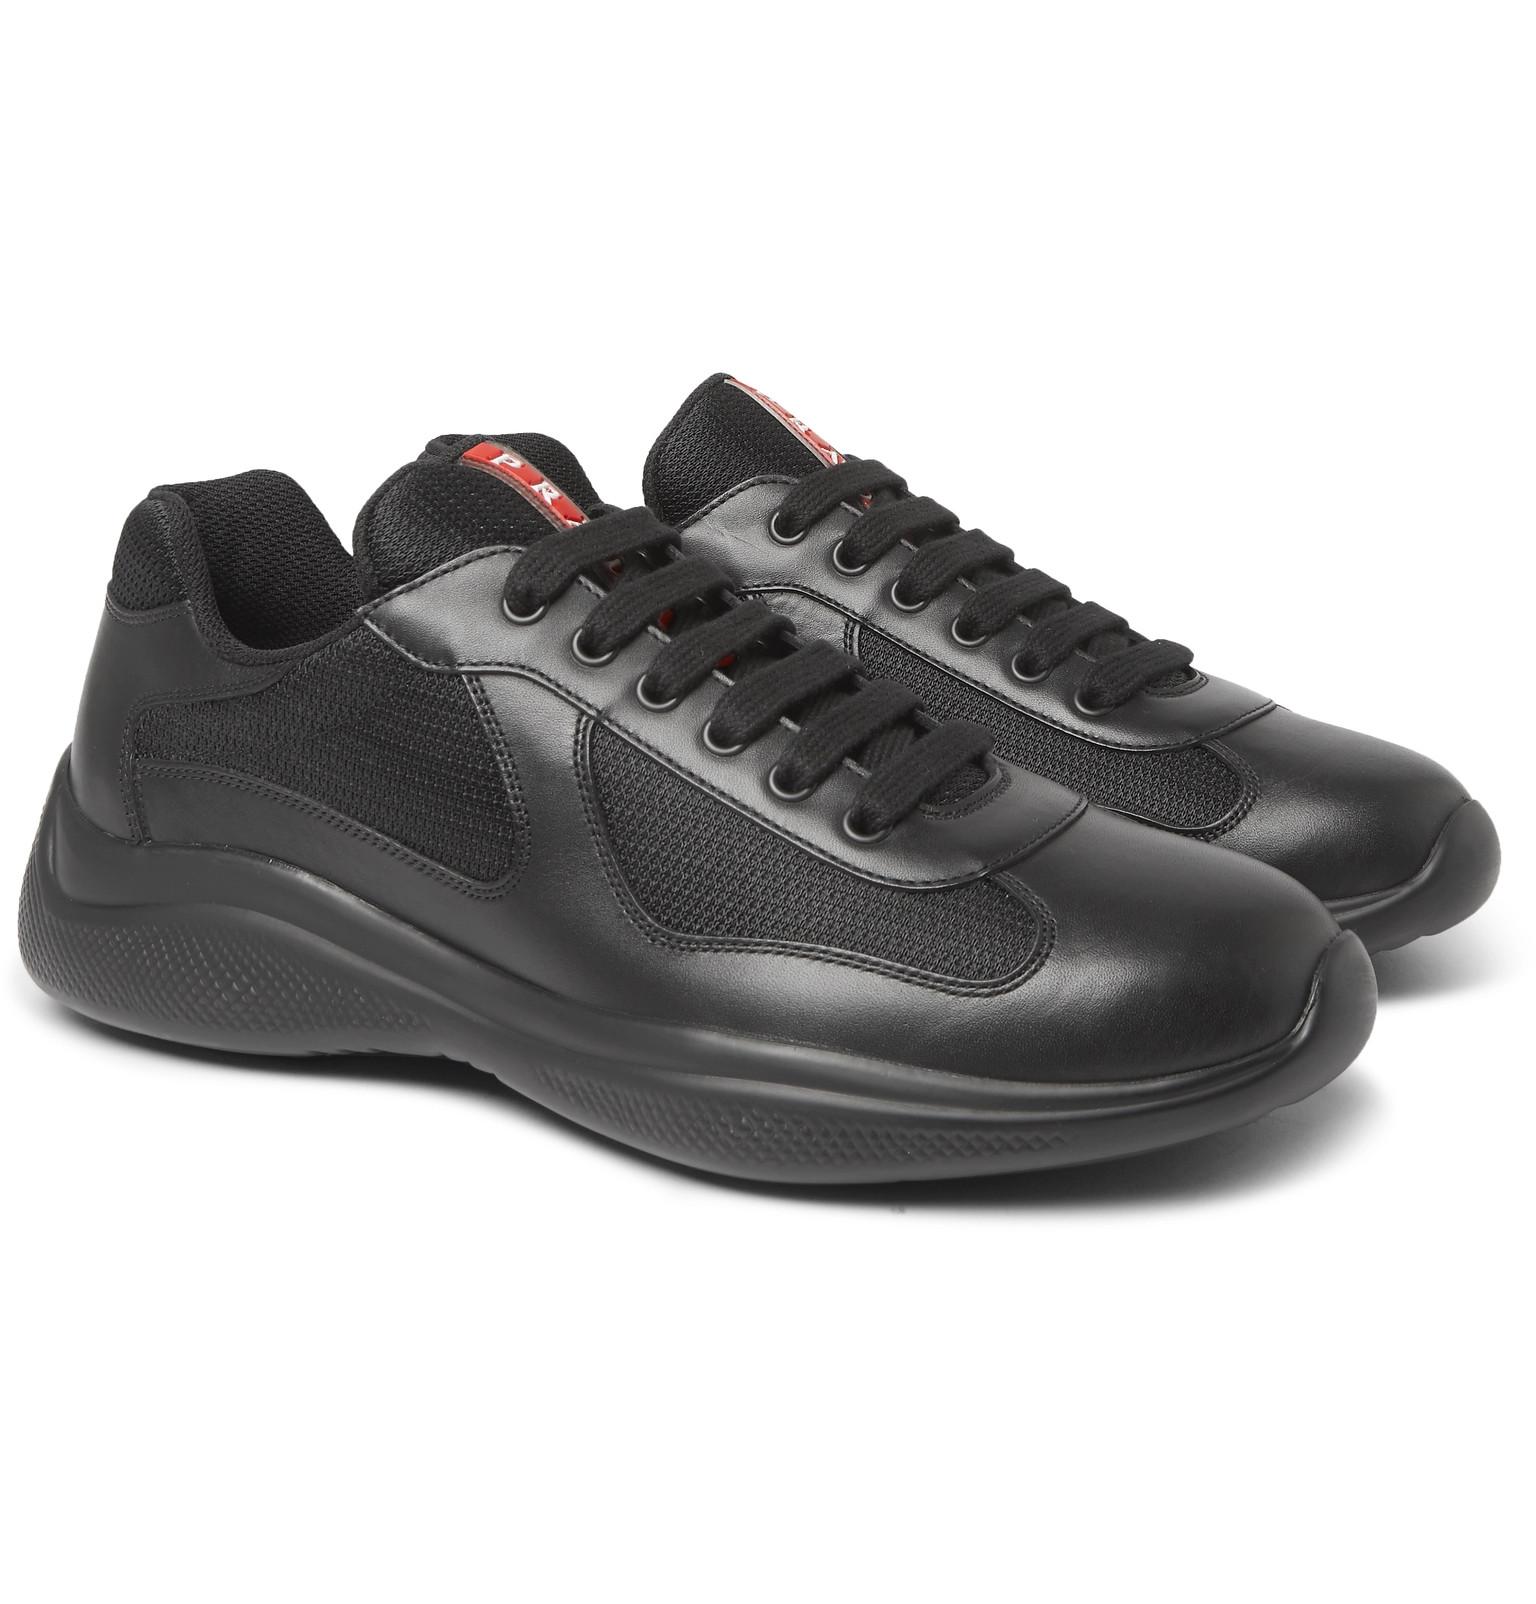 Prada America's Cup Leather And Mesh Sneakers in Black for Men - Lyst